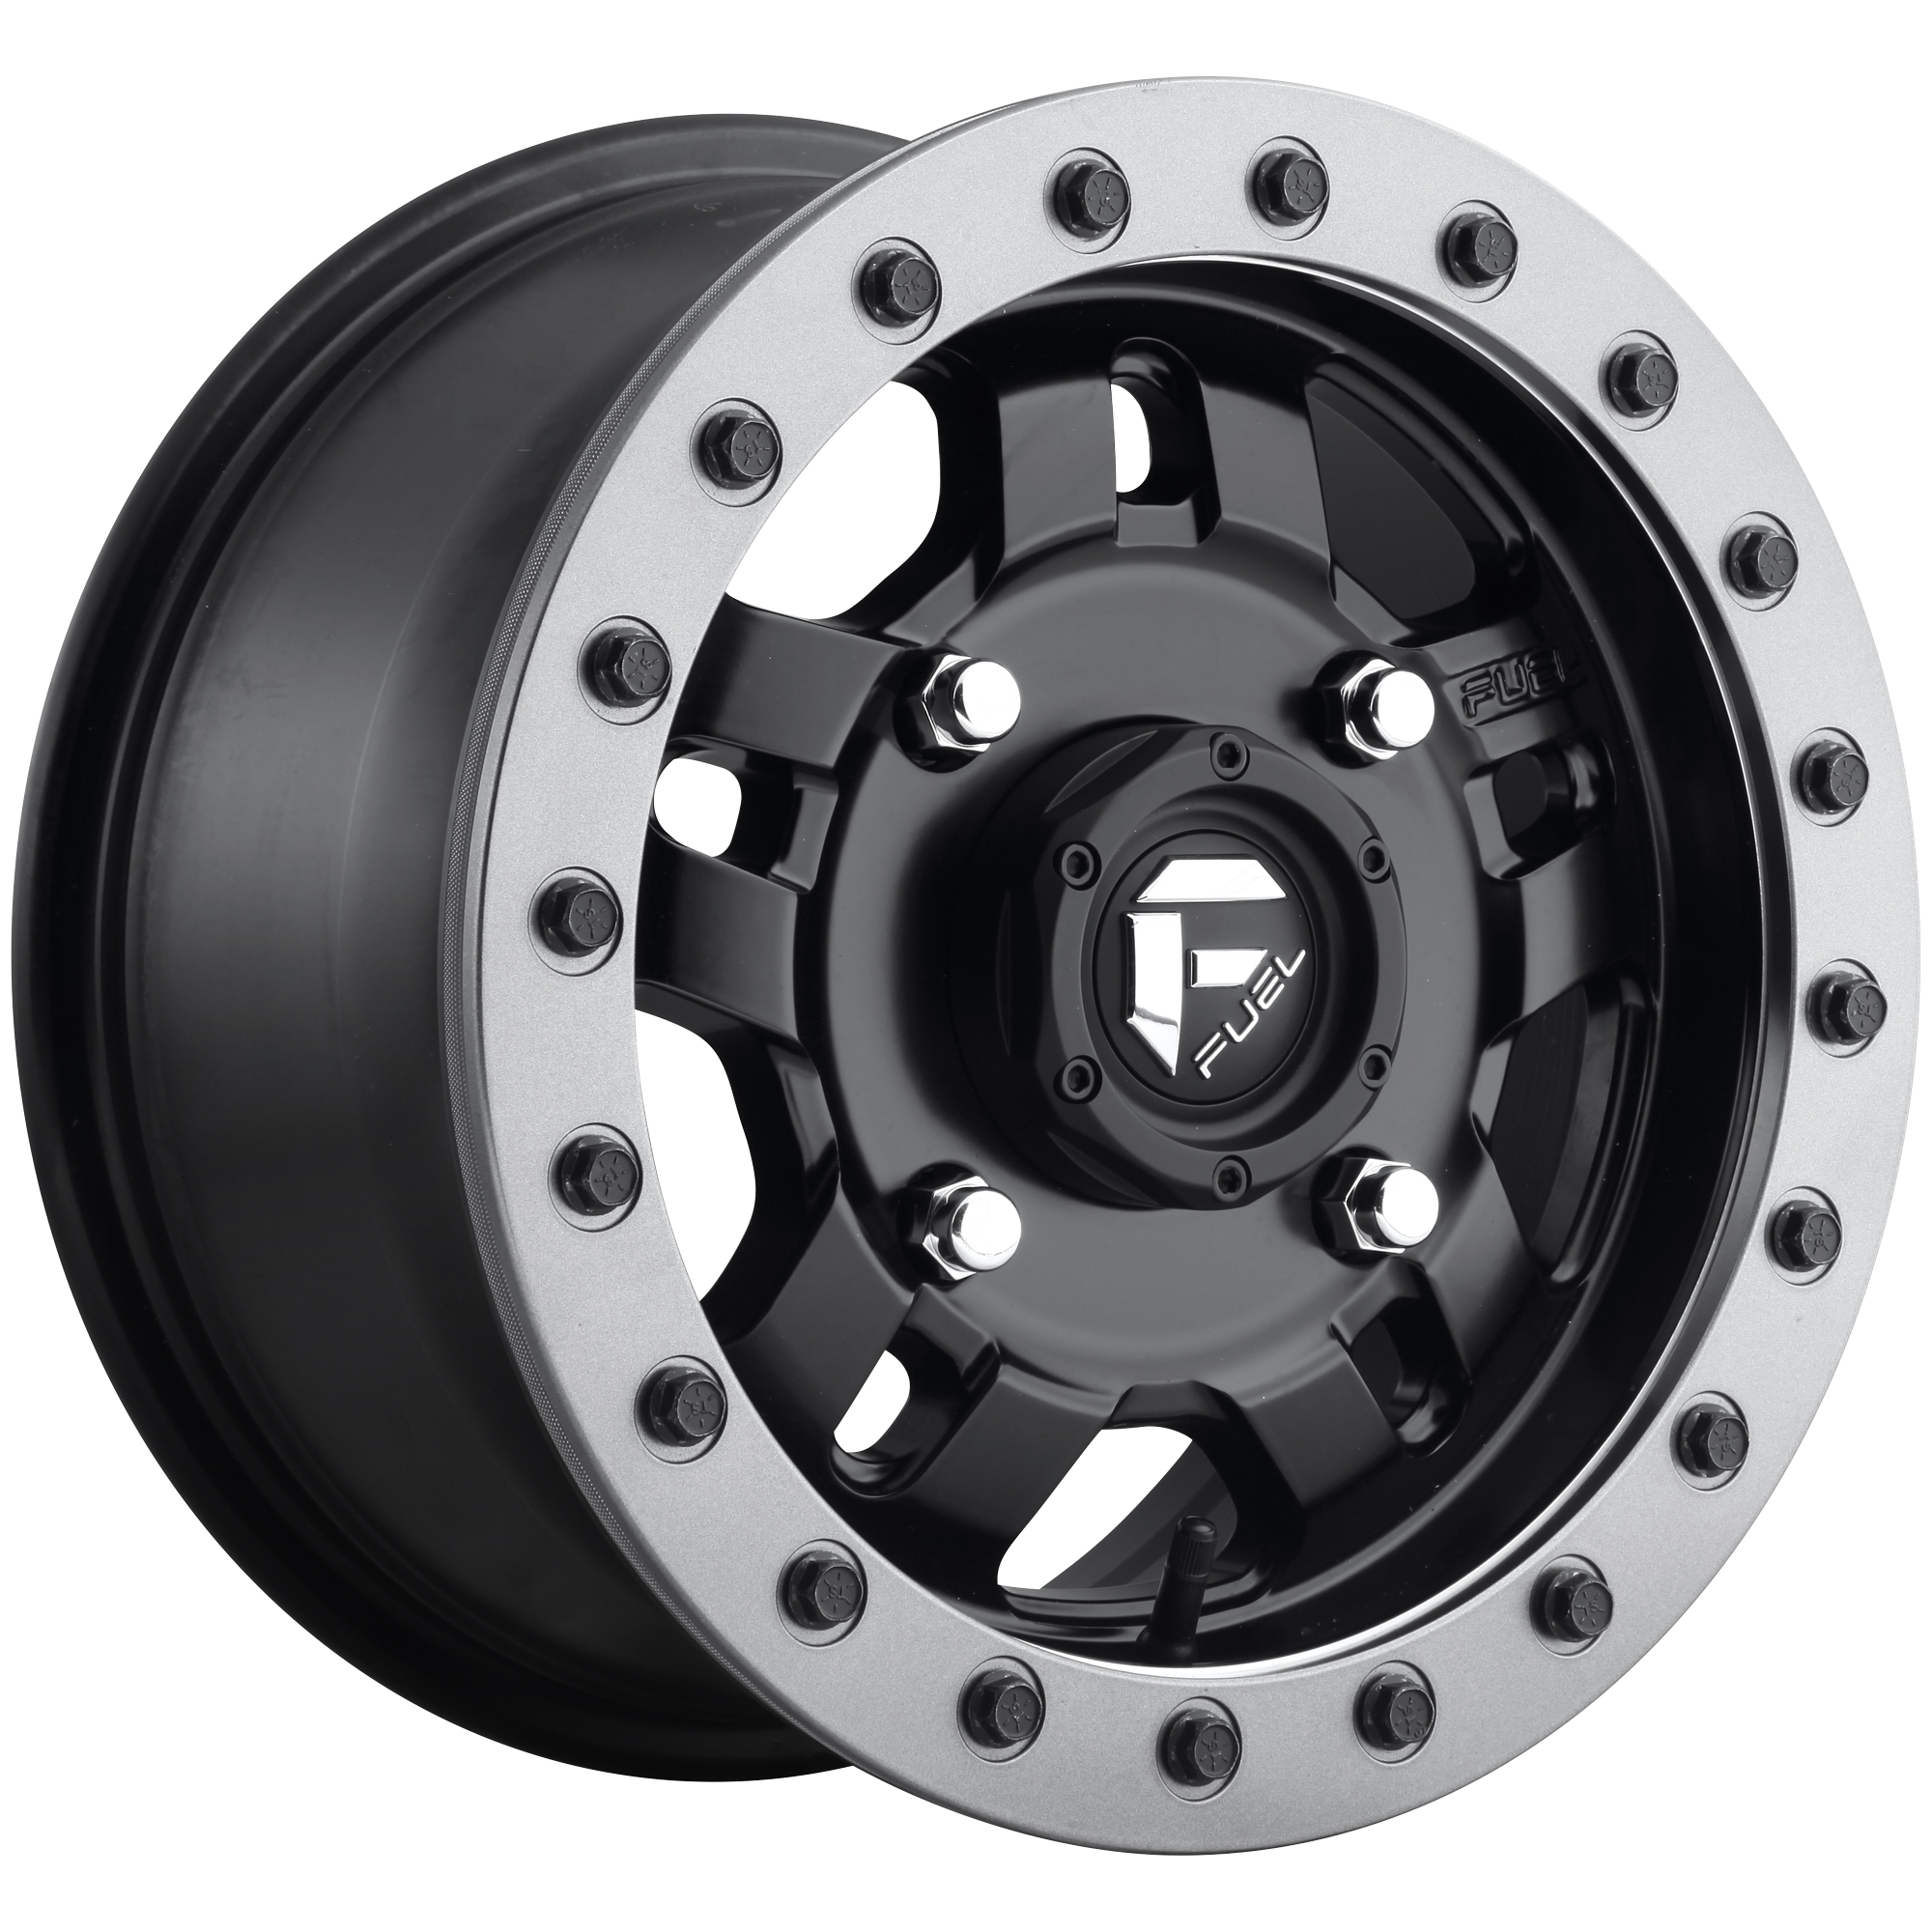 ANZA BL - OFF ROAD ONLY 14x7 4x137.00 MATTE BLACK (13 mm) - Tires and Engine Performance